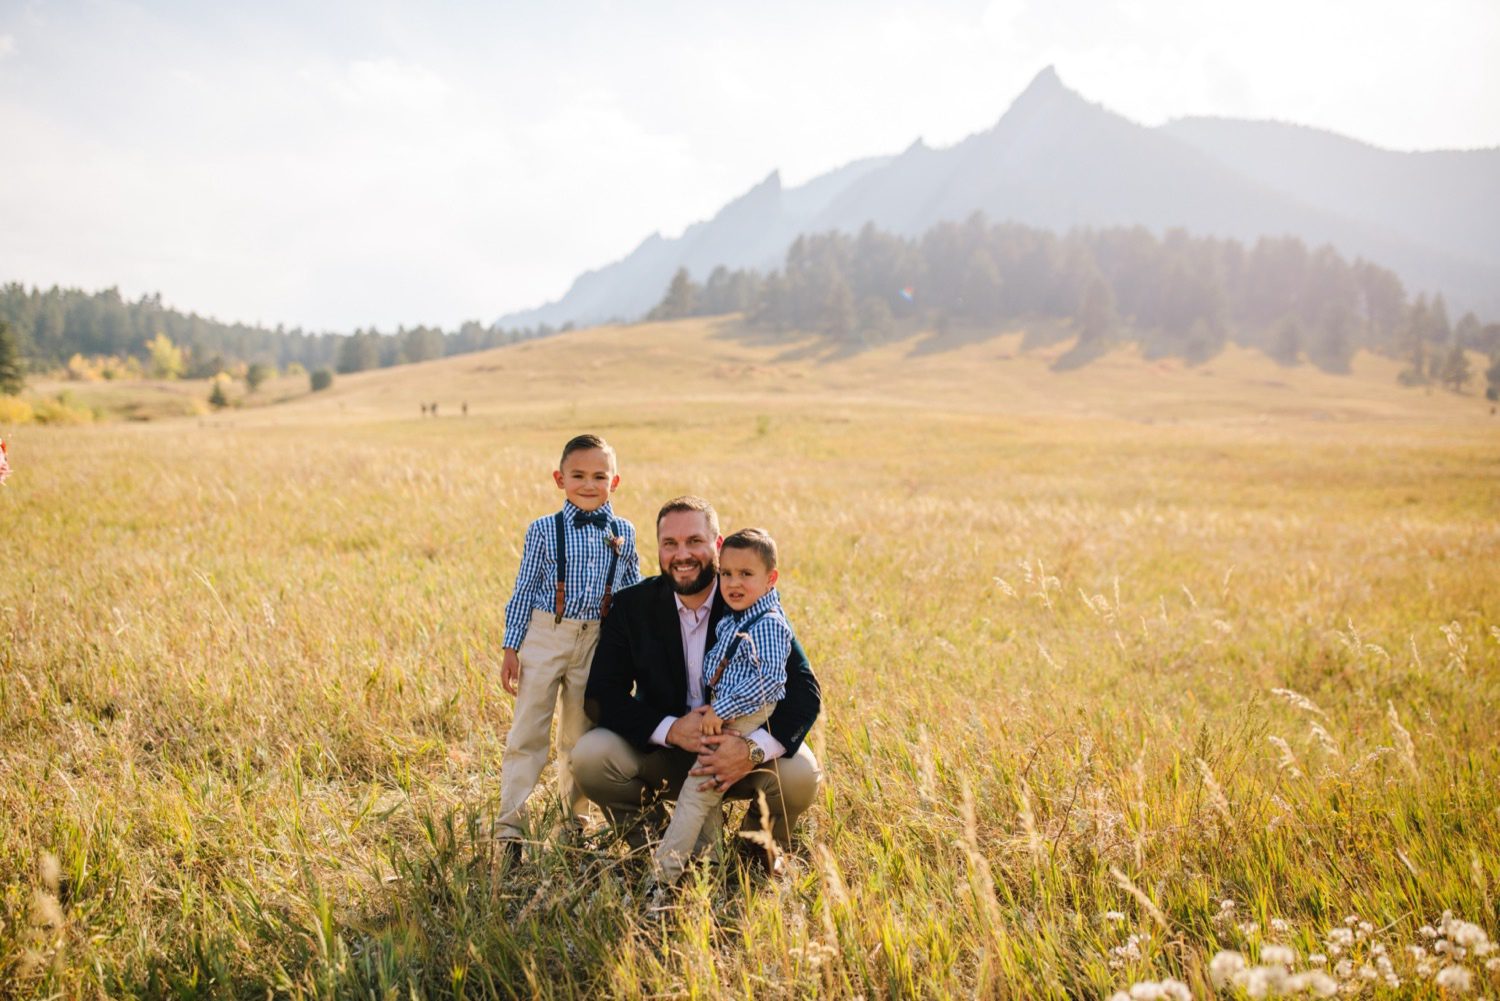 Colorado Elopement, Fall elopement, Elopement Photography, Eloping with kids, Eloping with family, Blended family elopement, Boulder Elopement, Chautauqua Park Elopement, Boulder Flatirons, Rocky Mountain Elopement, Boulder Elopement Photographer, Colorado Elopement Photographer, Elopement inspiration, Elopement ideas, Mountain Elopement, Micro wedding, Intimate wedding, small wedding, wedding photography, elopement planning, Colorado, Elopement